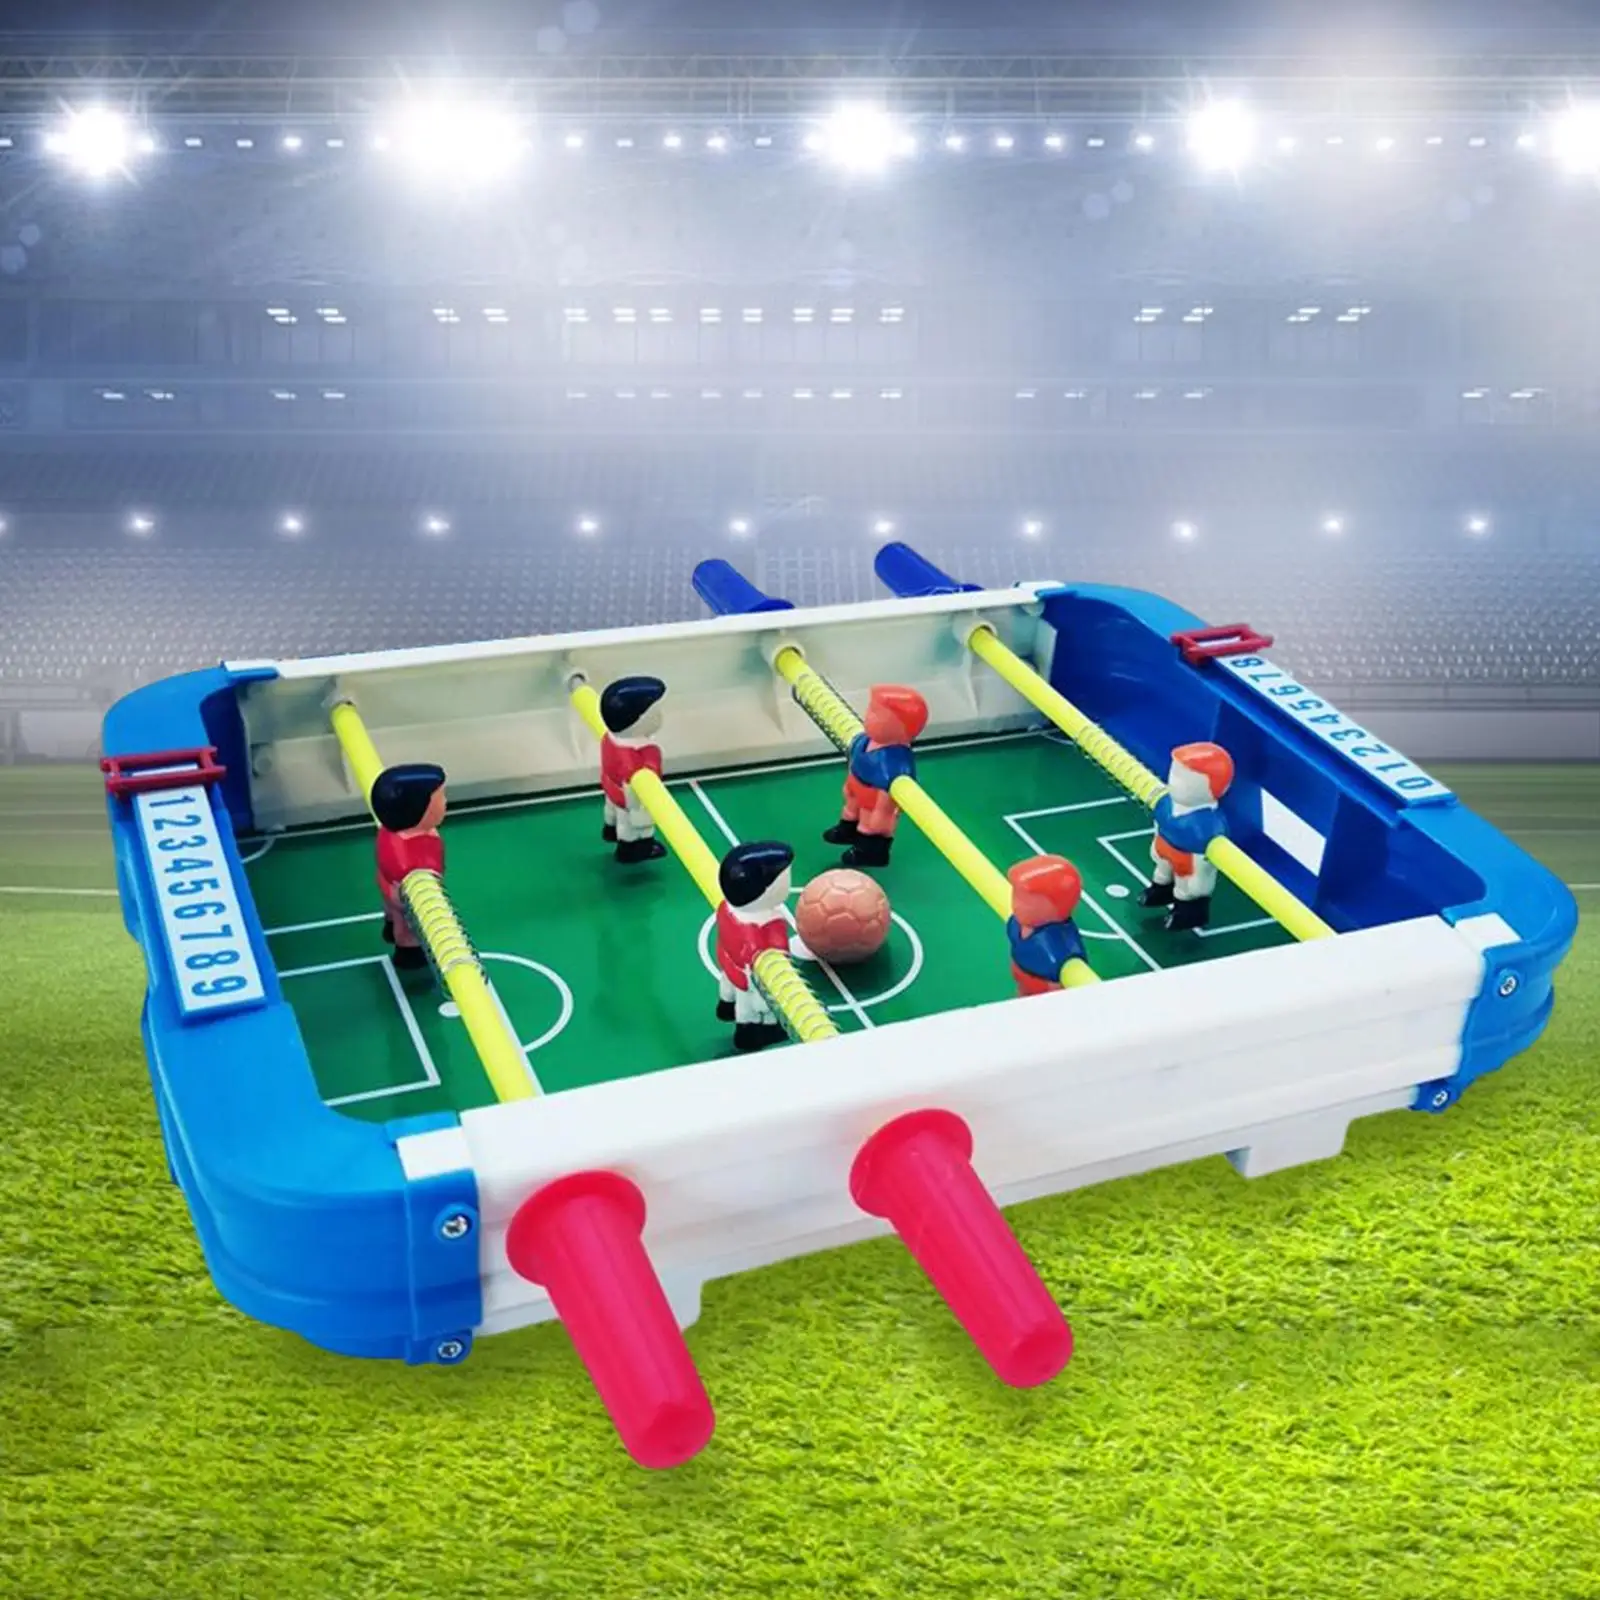 Portable Foosball Table, Table Top Football Game Educational Toys Tabletop Soccer Game for Adults Kids Boys Girls Birthday Gifts